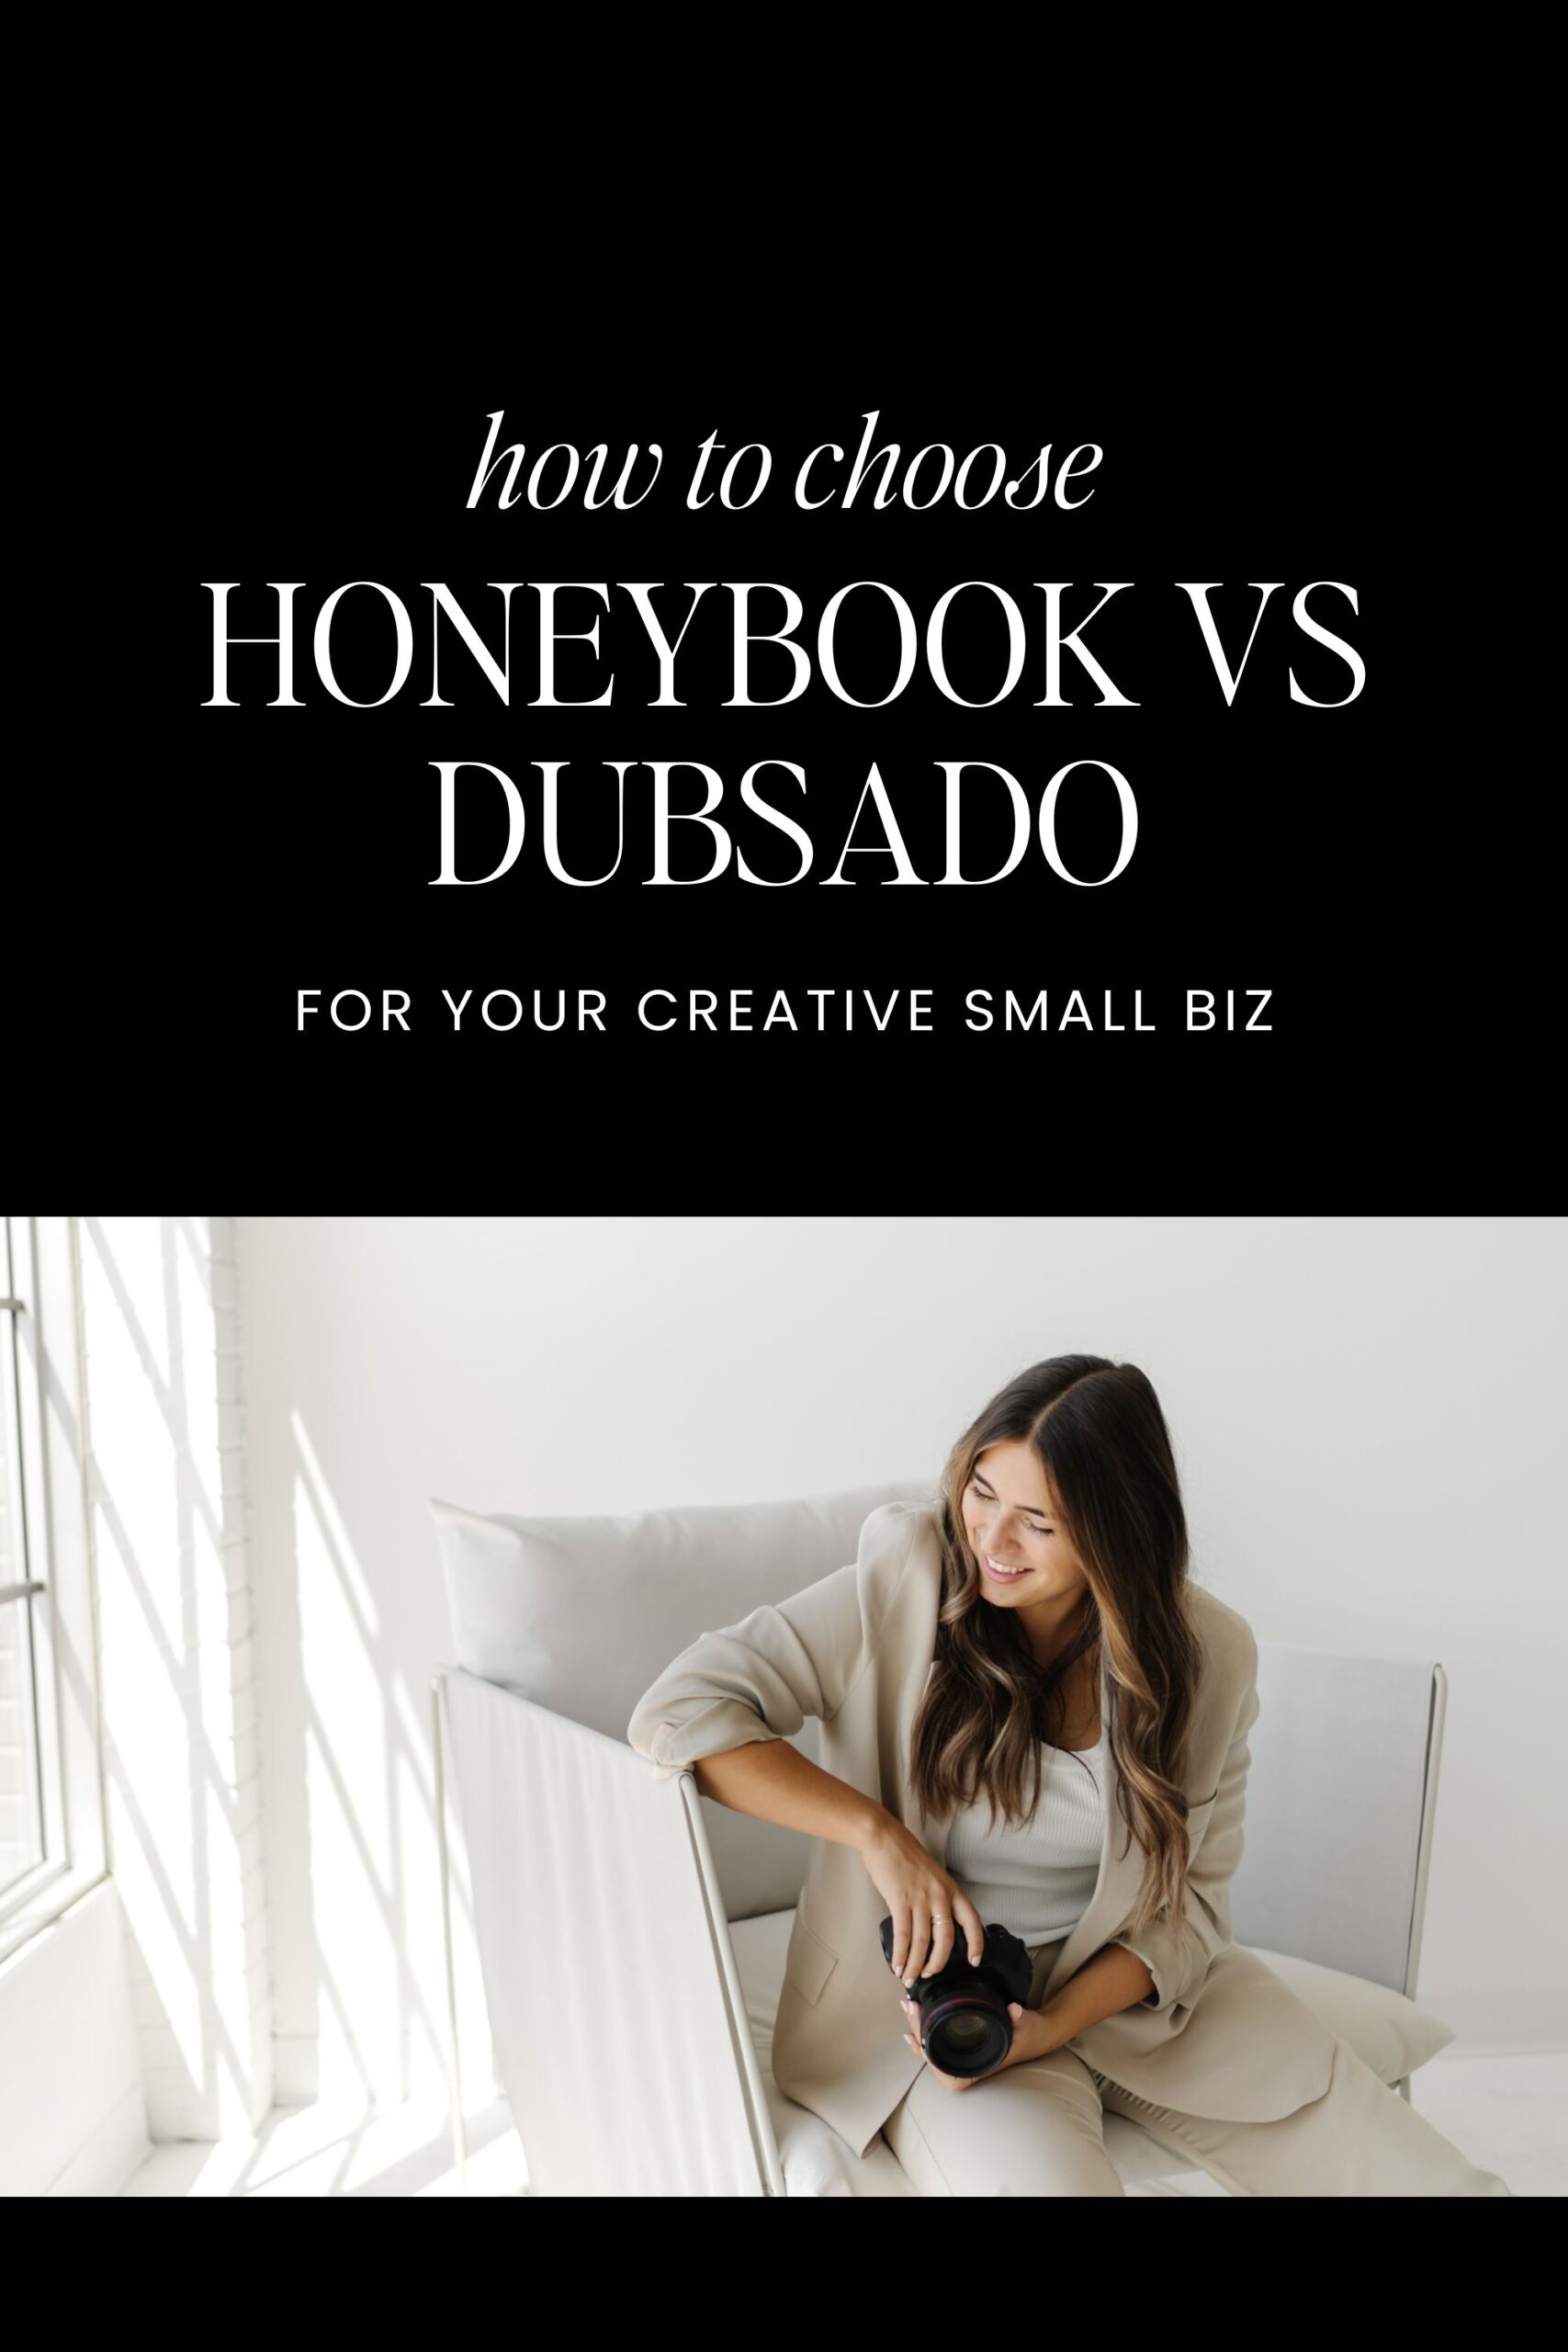 How to choose Honeybook vs Dubsado for your creative small business